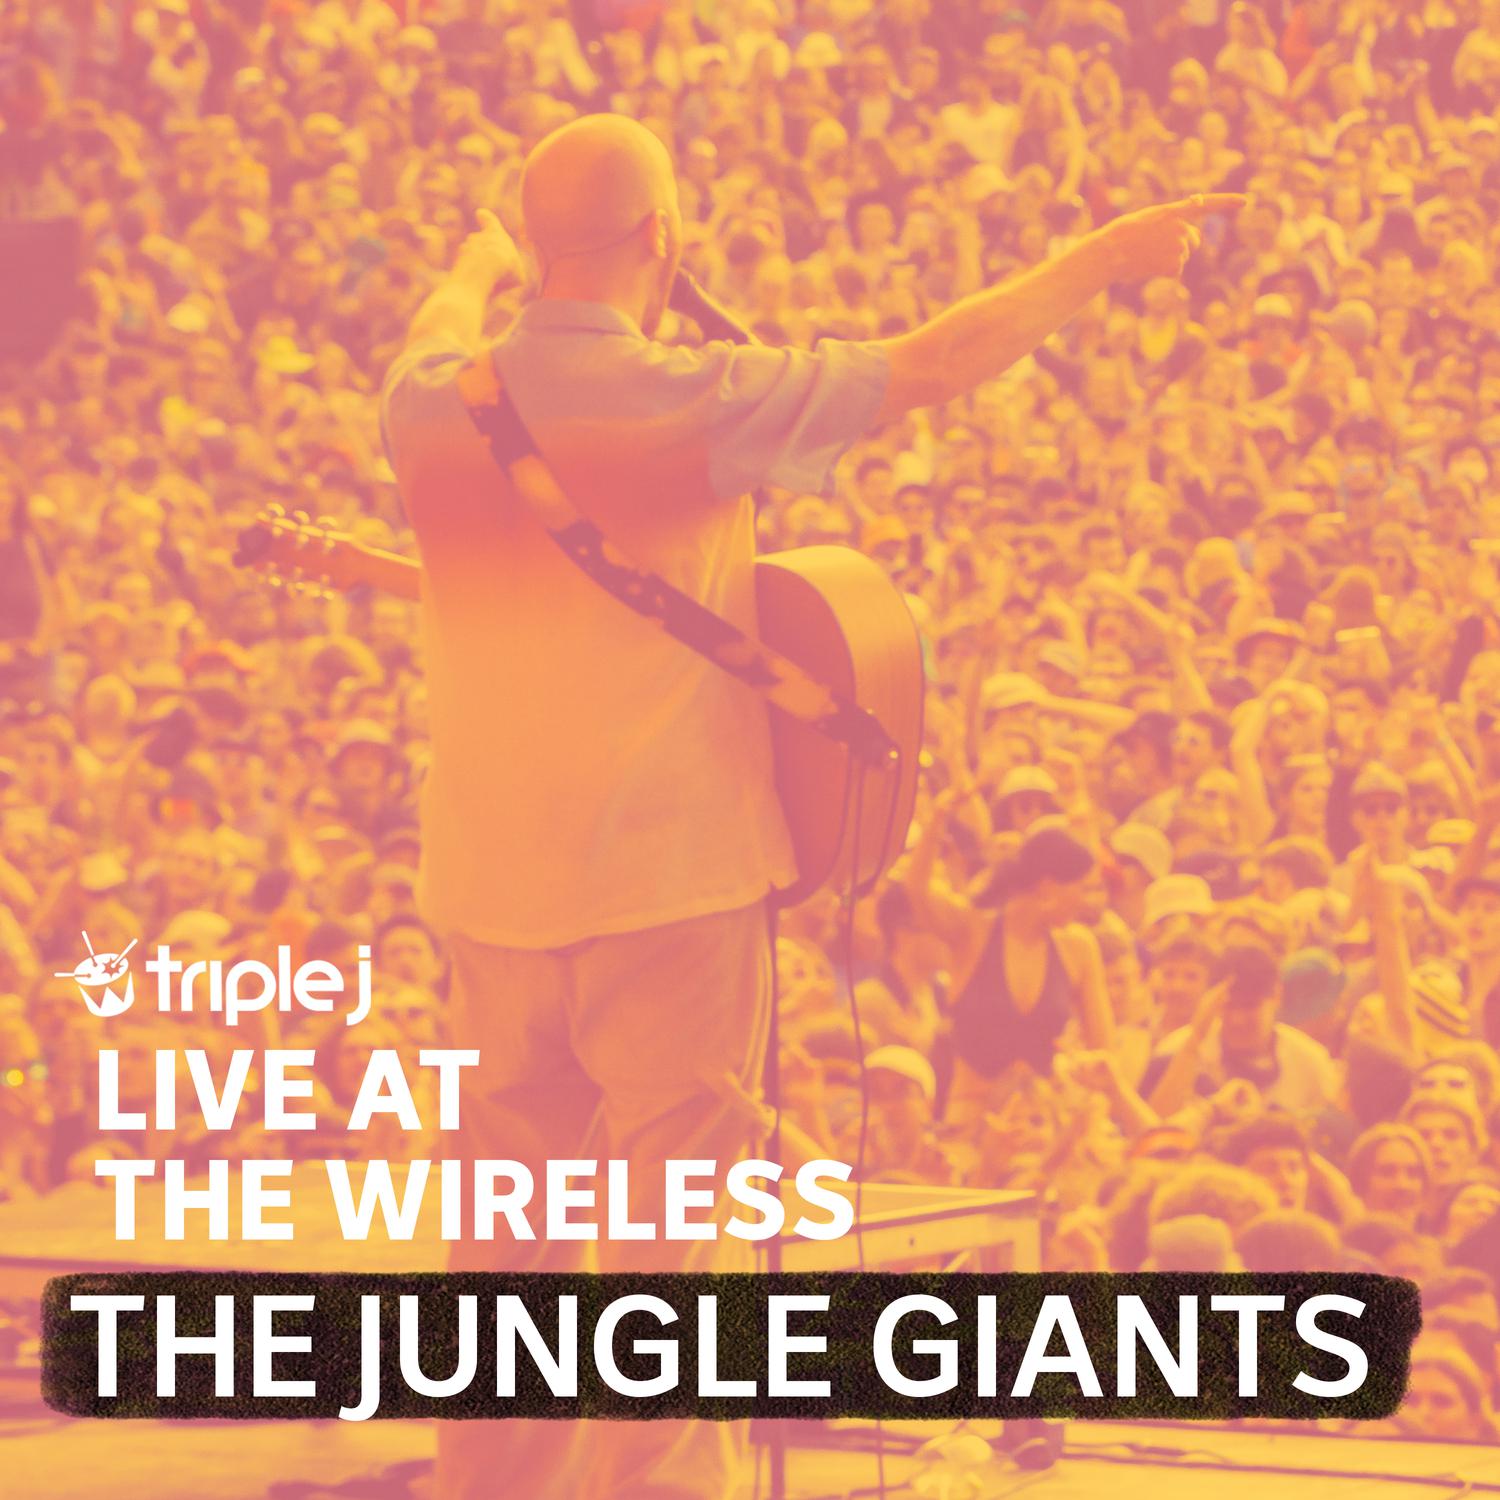 The Jungle Giants - On Your Way Down (triple j Live At The Wireless)